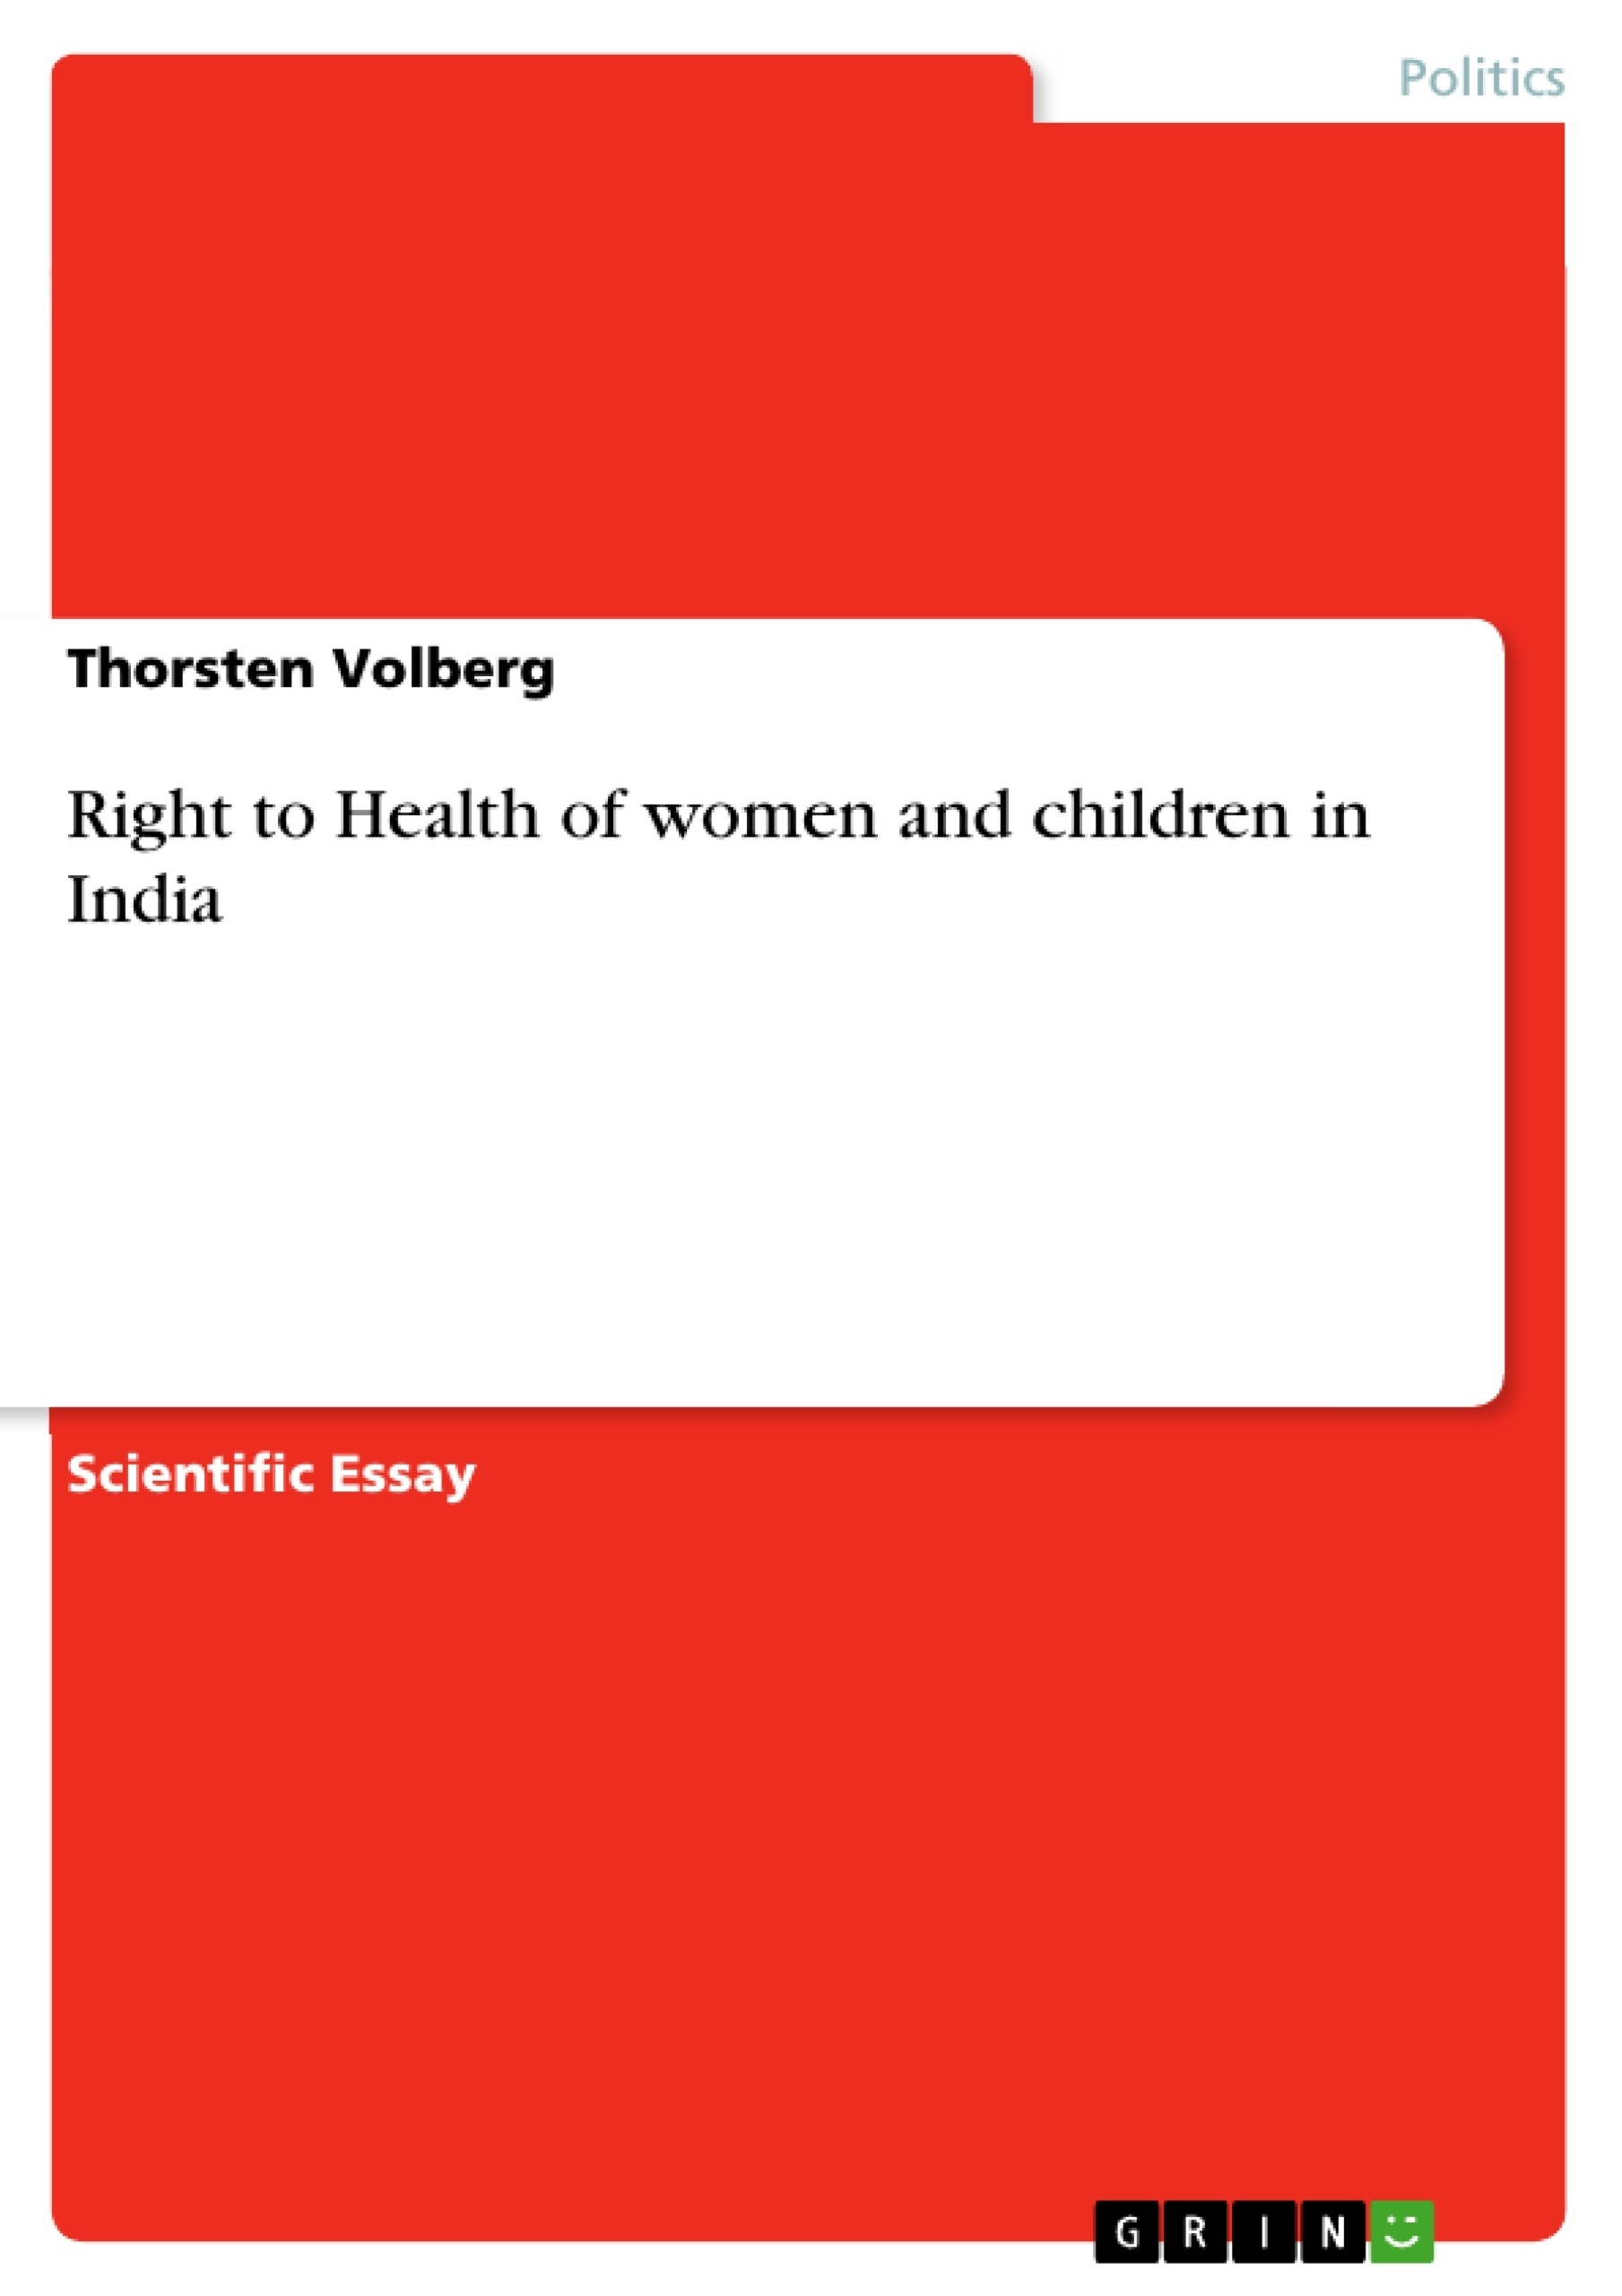 Titre: Right to Health of women and children in India